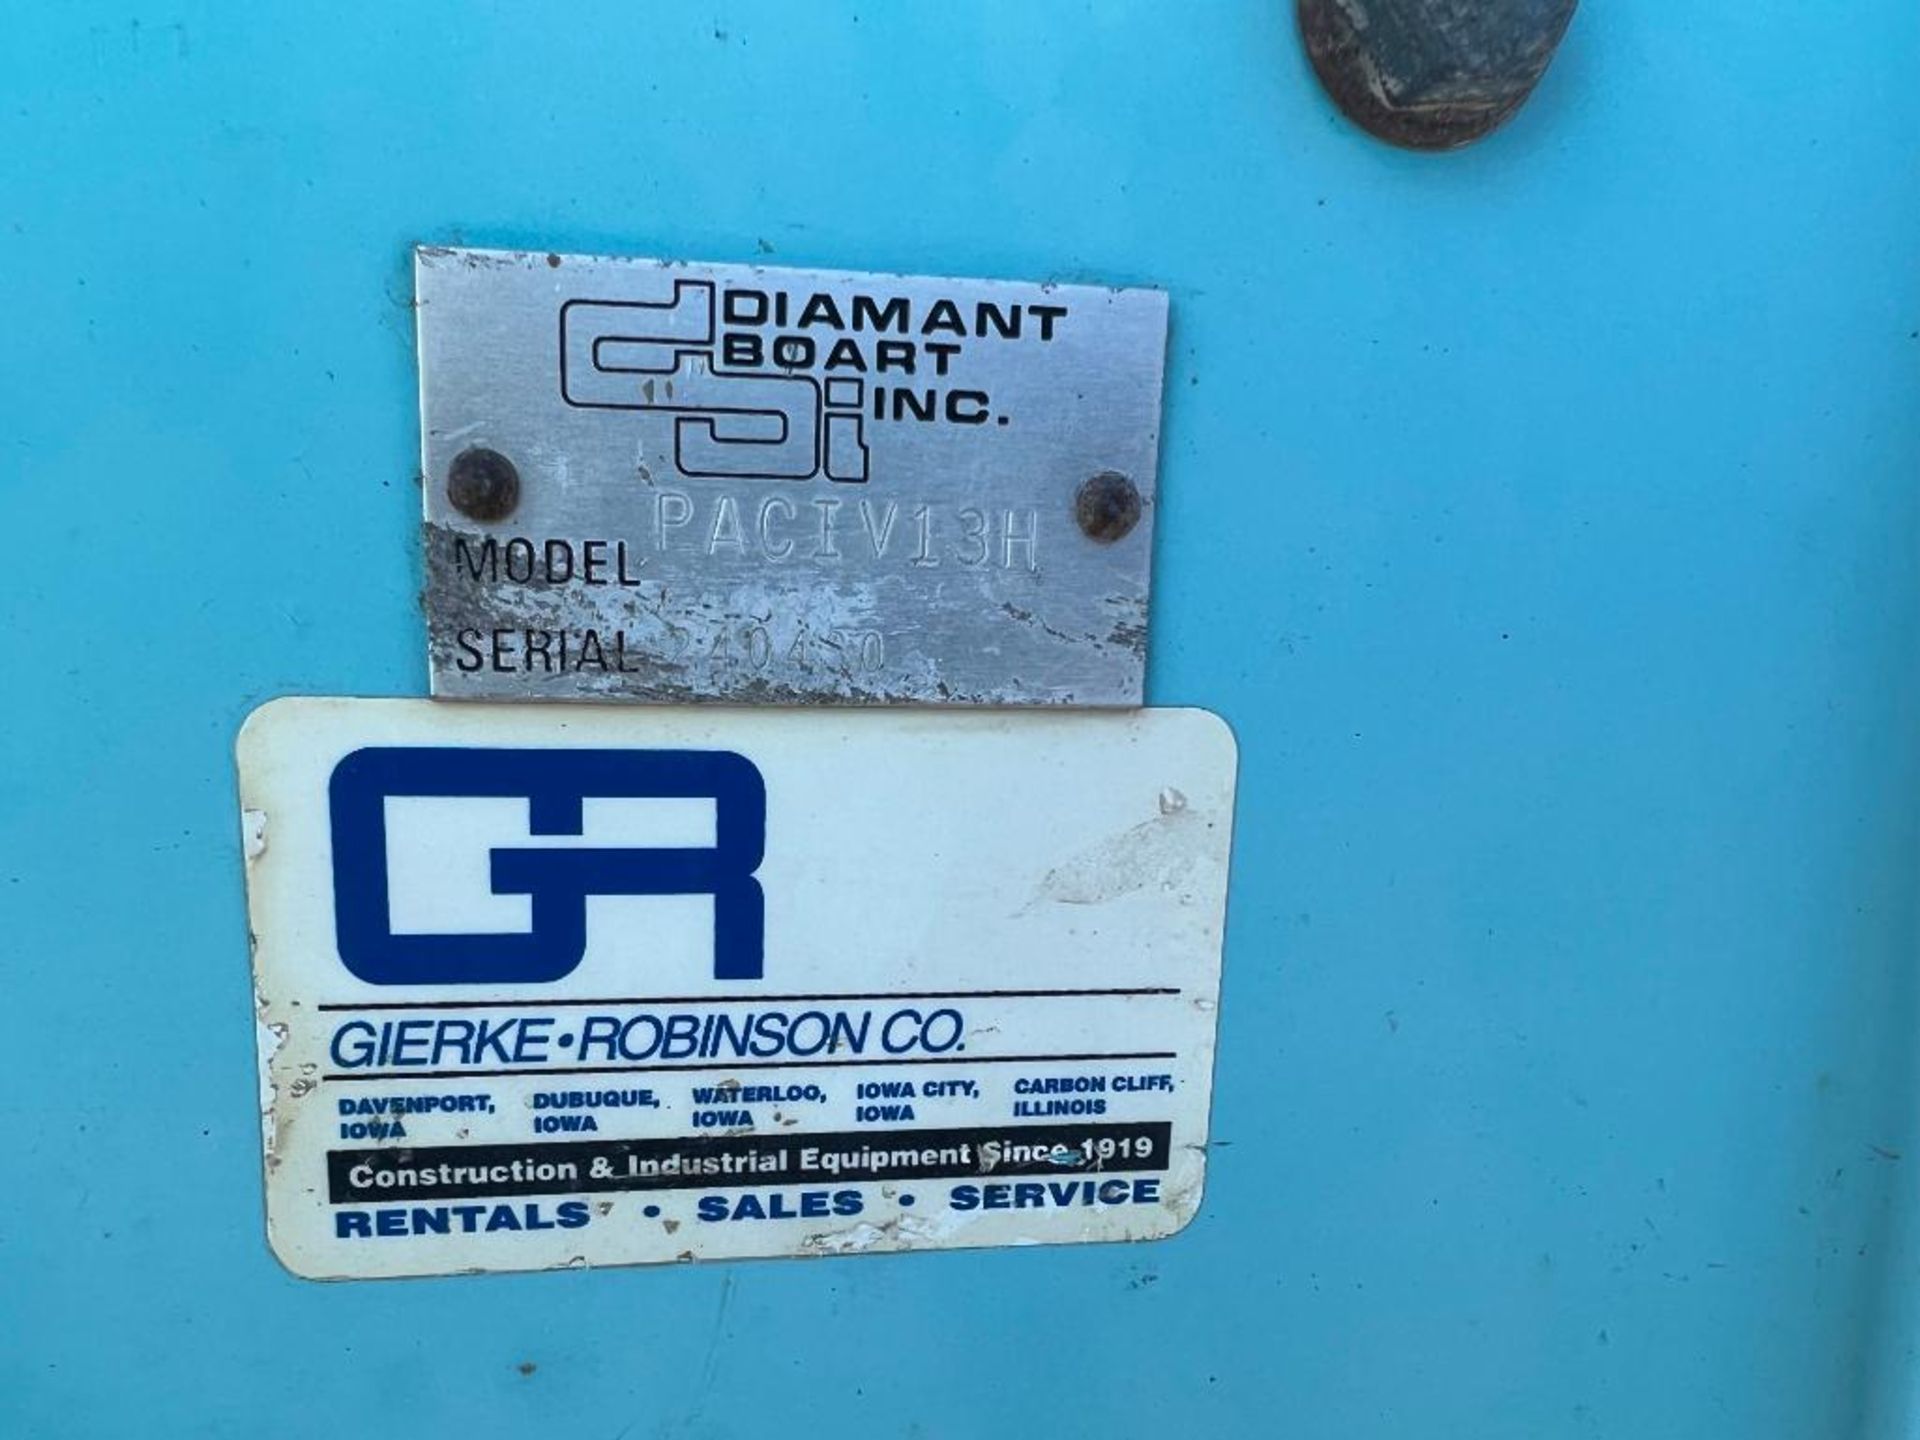 Diamant Boart Target PAC-IV-13H Concrete Saw, Serial #240430, Honda Engine. Located in Mt. Pleasant, - Image 4 of 6